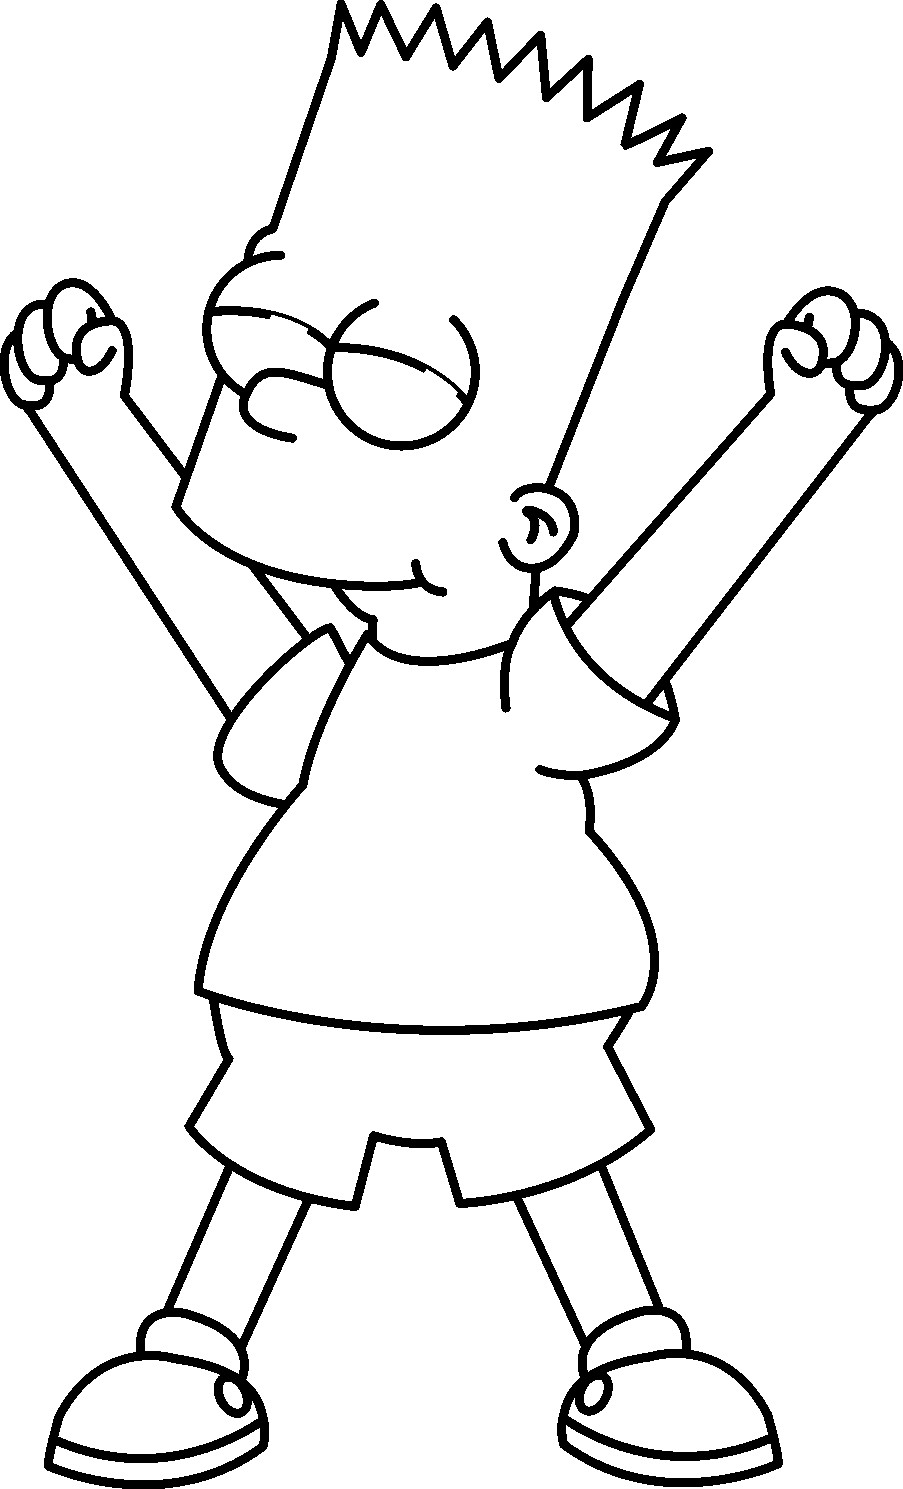 Bart Simpson Coloring Pages
 Free Printable Simpsons Coloring Pages For Kids